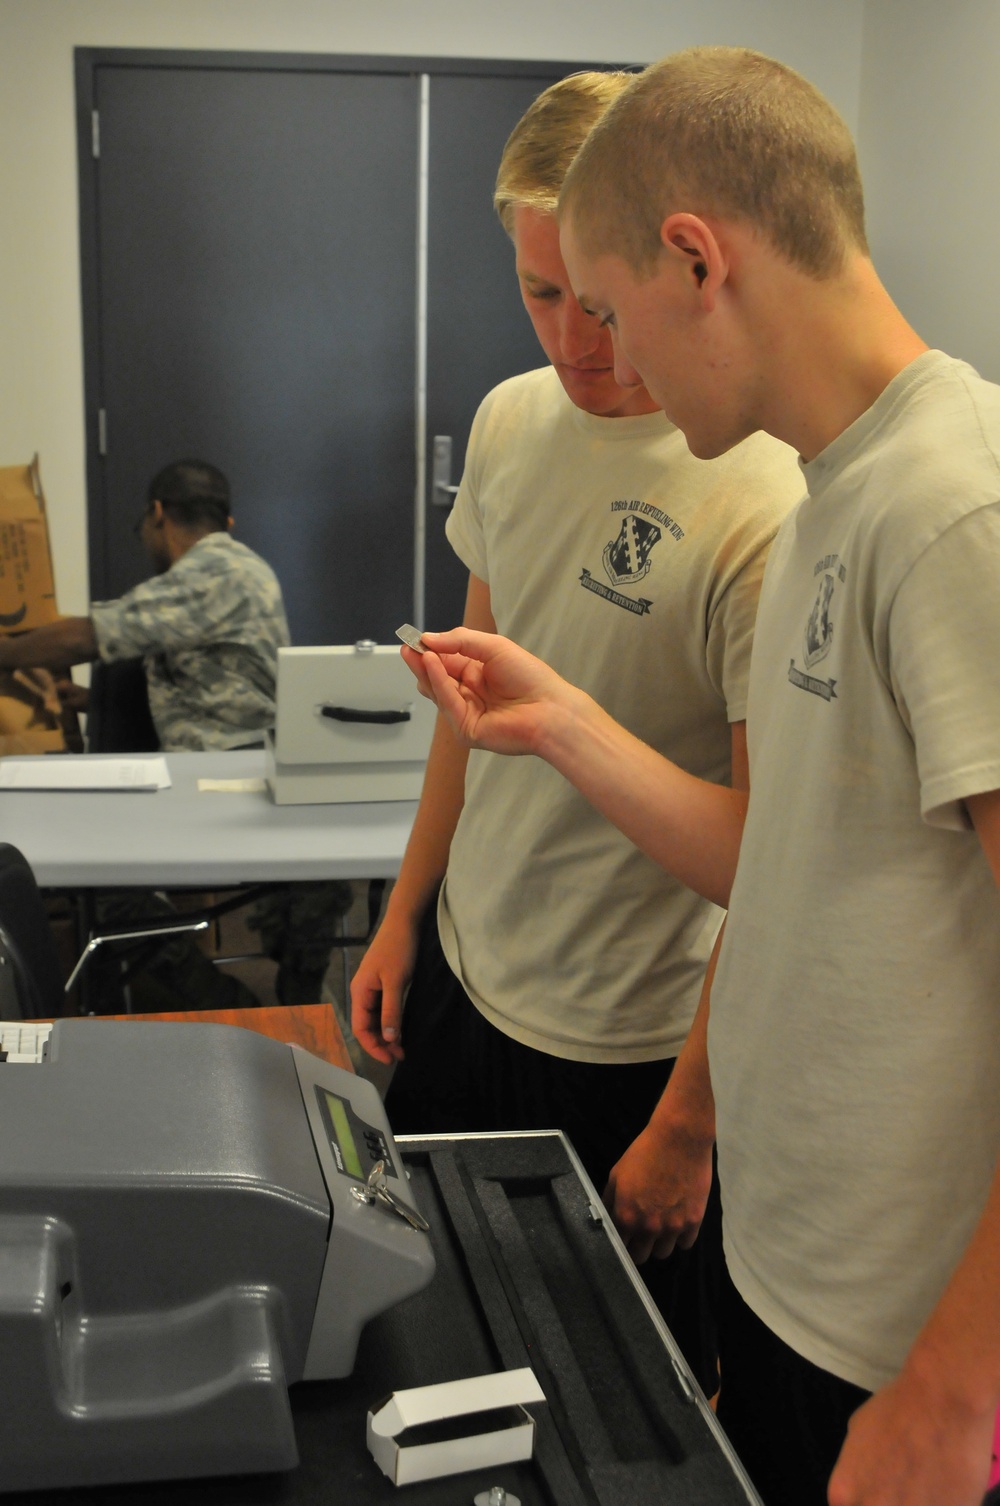 Student flight trainees help in the processing line